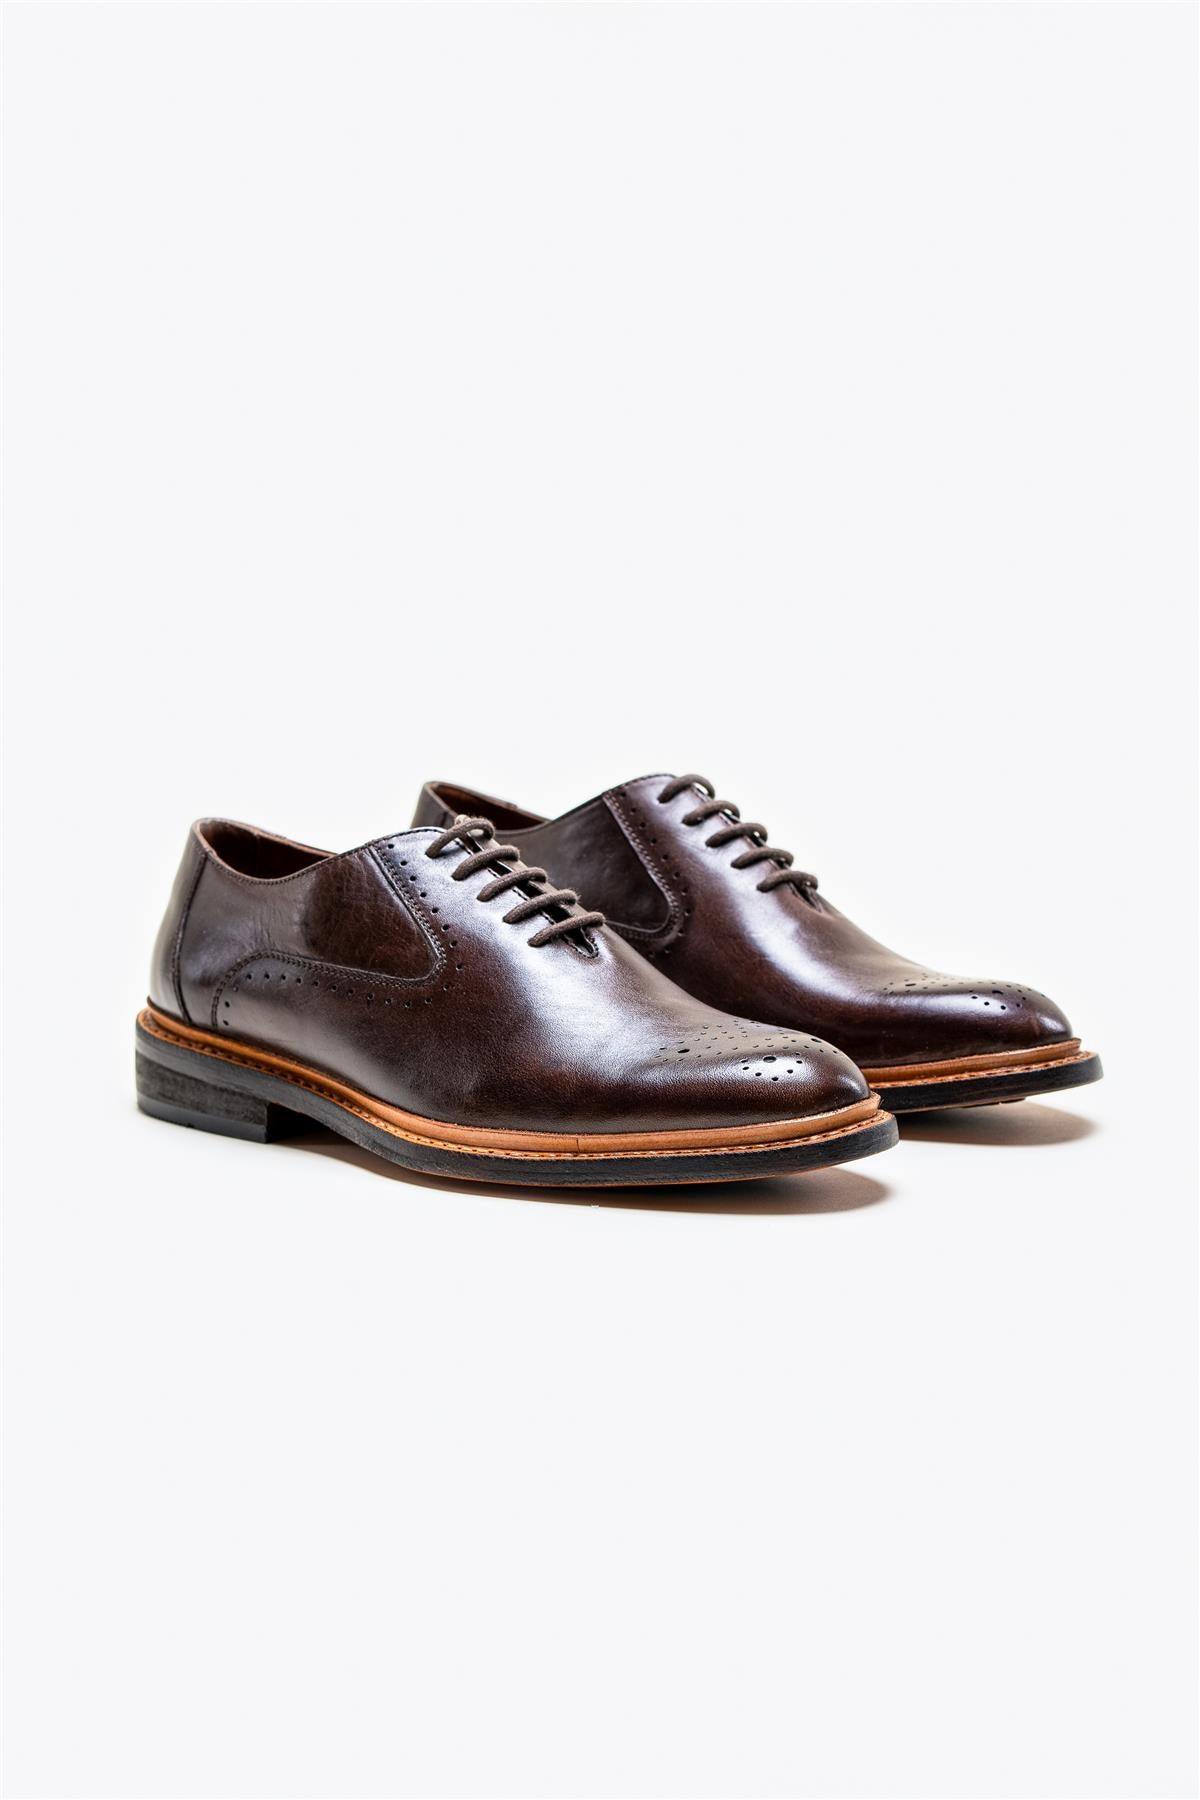 Brentwood brown shoes front